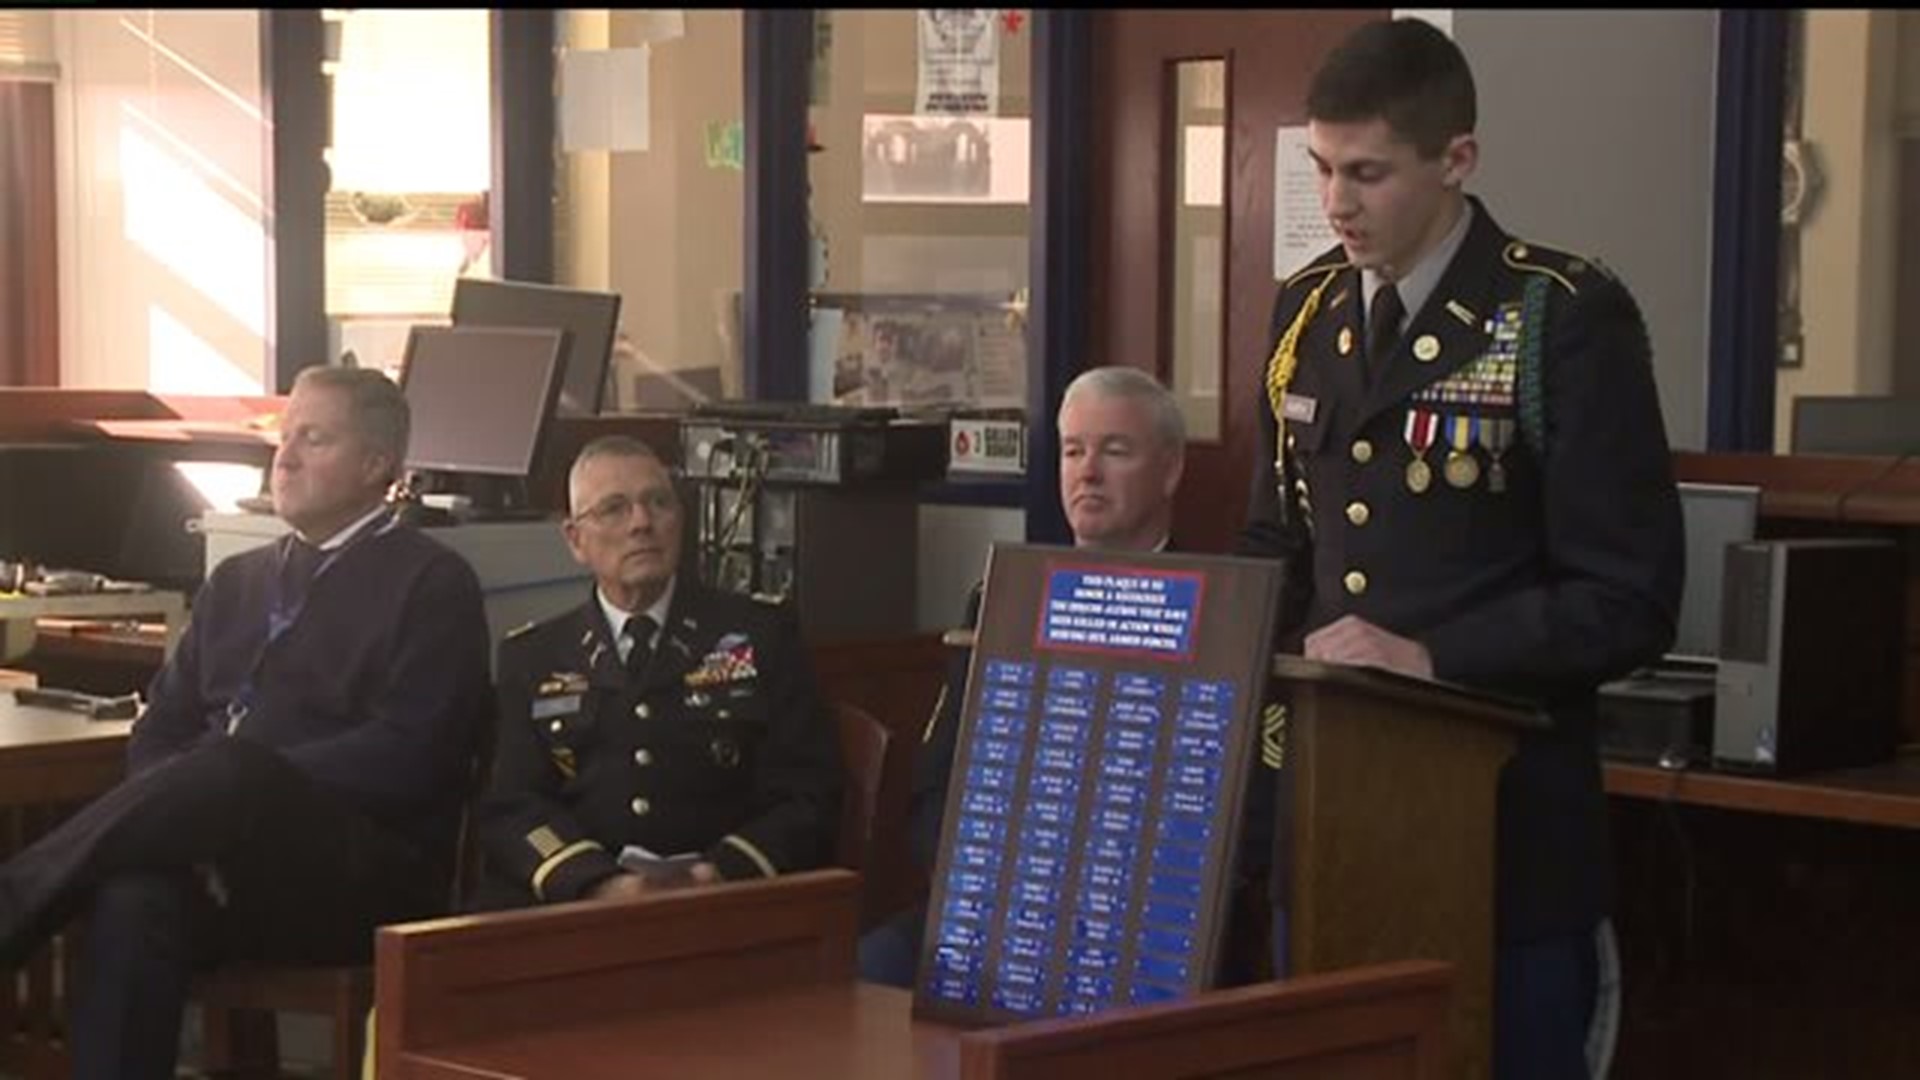 Vets honored by Davenport Central ROTC